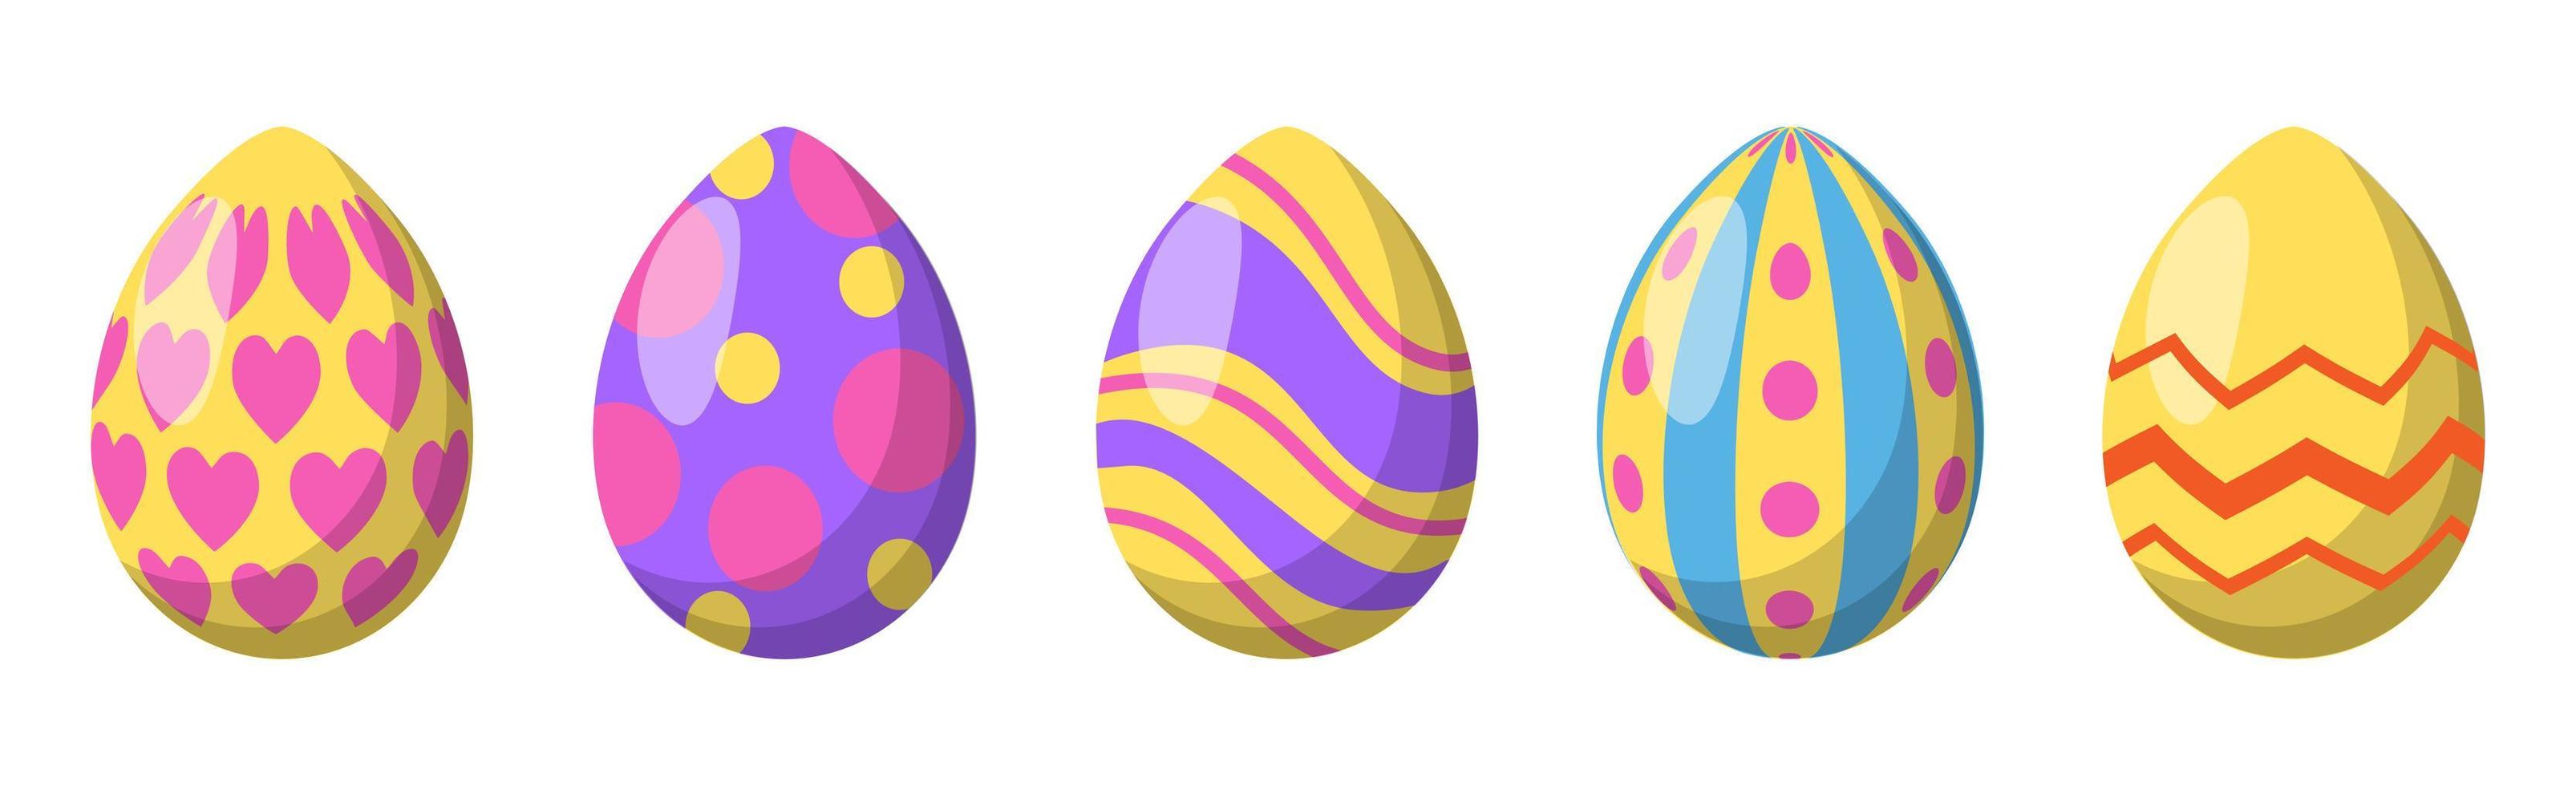 Set of 5 different colorful Easter eggs - Vector